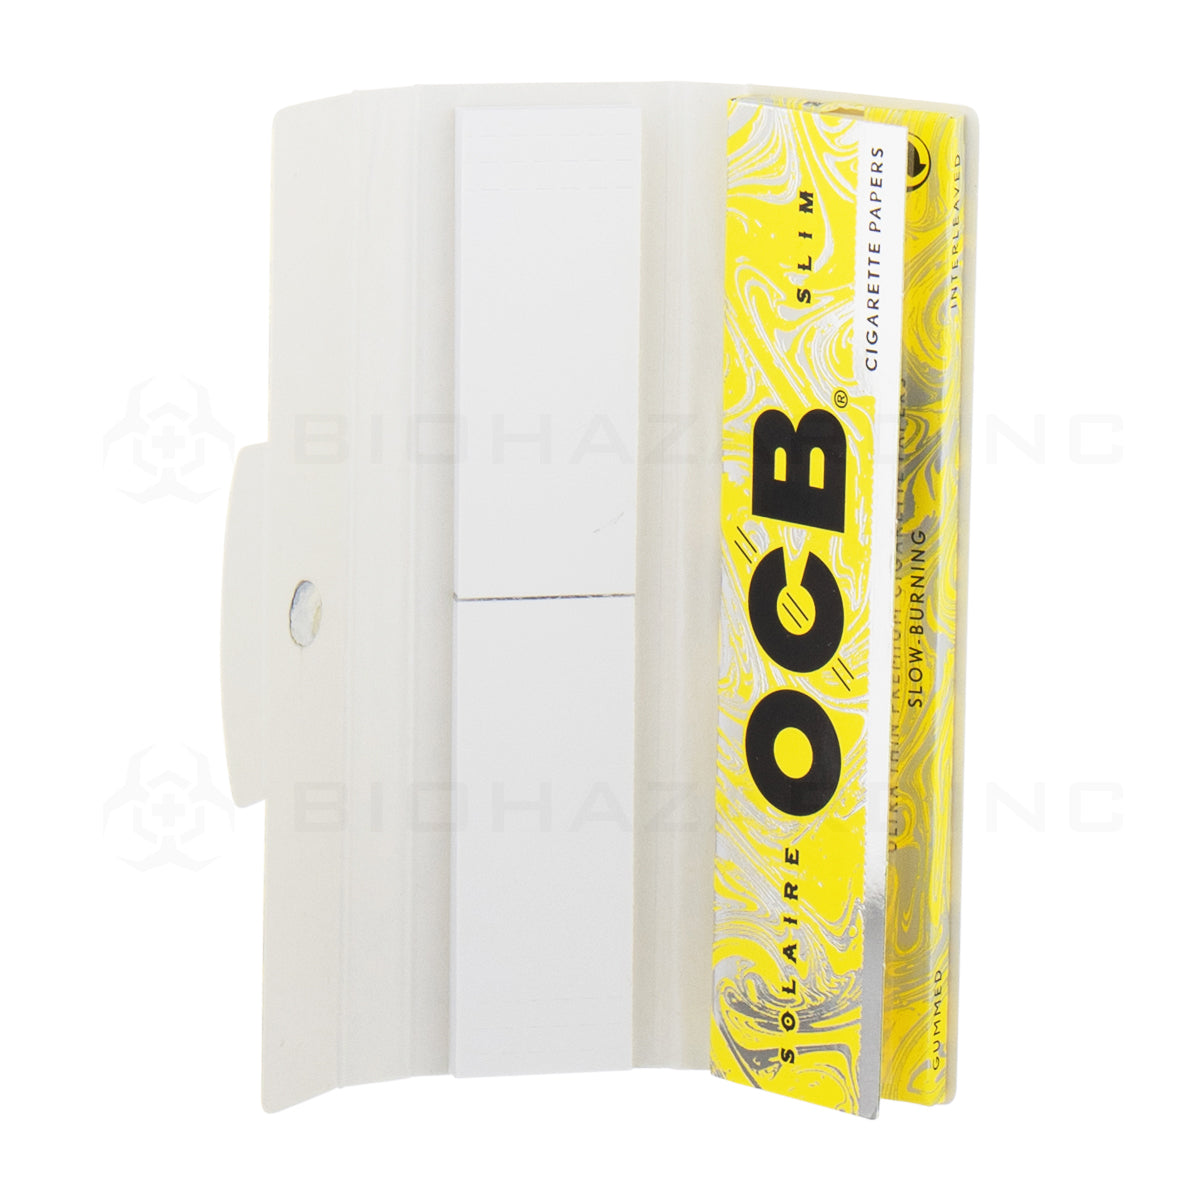 OCB® | 'Retail Display' Solaire King Size Slim Rolling Papers w/ Tips | White Paper - 24 Count Rolling Papers + Tips OCB   